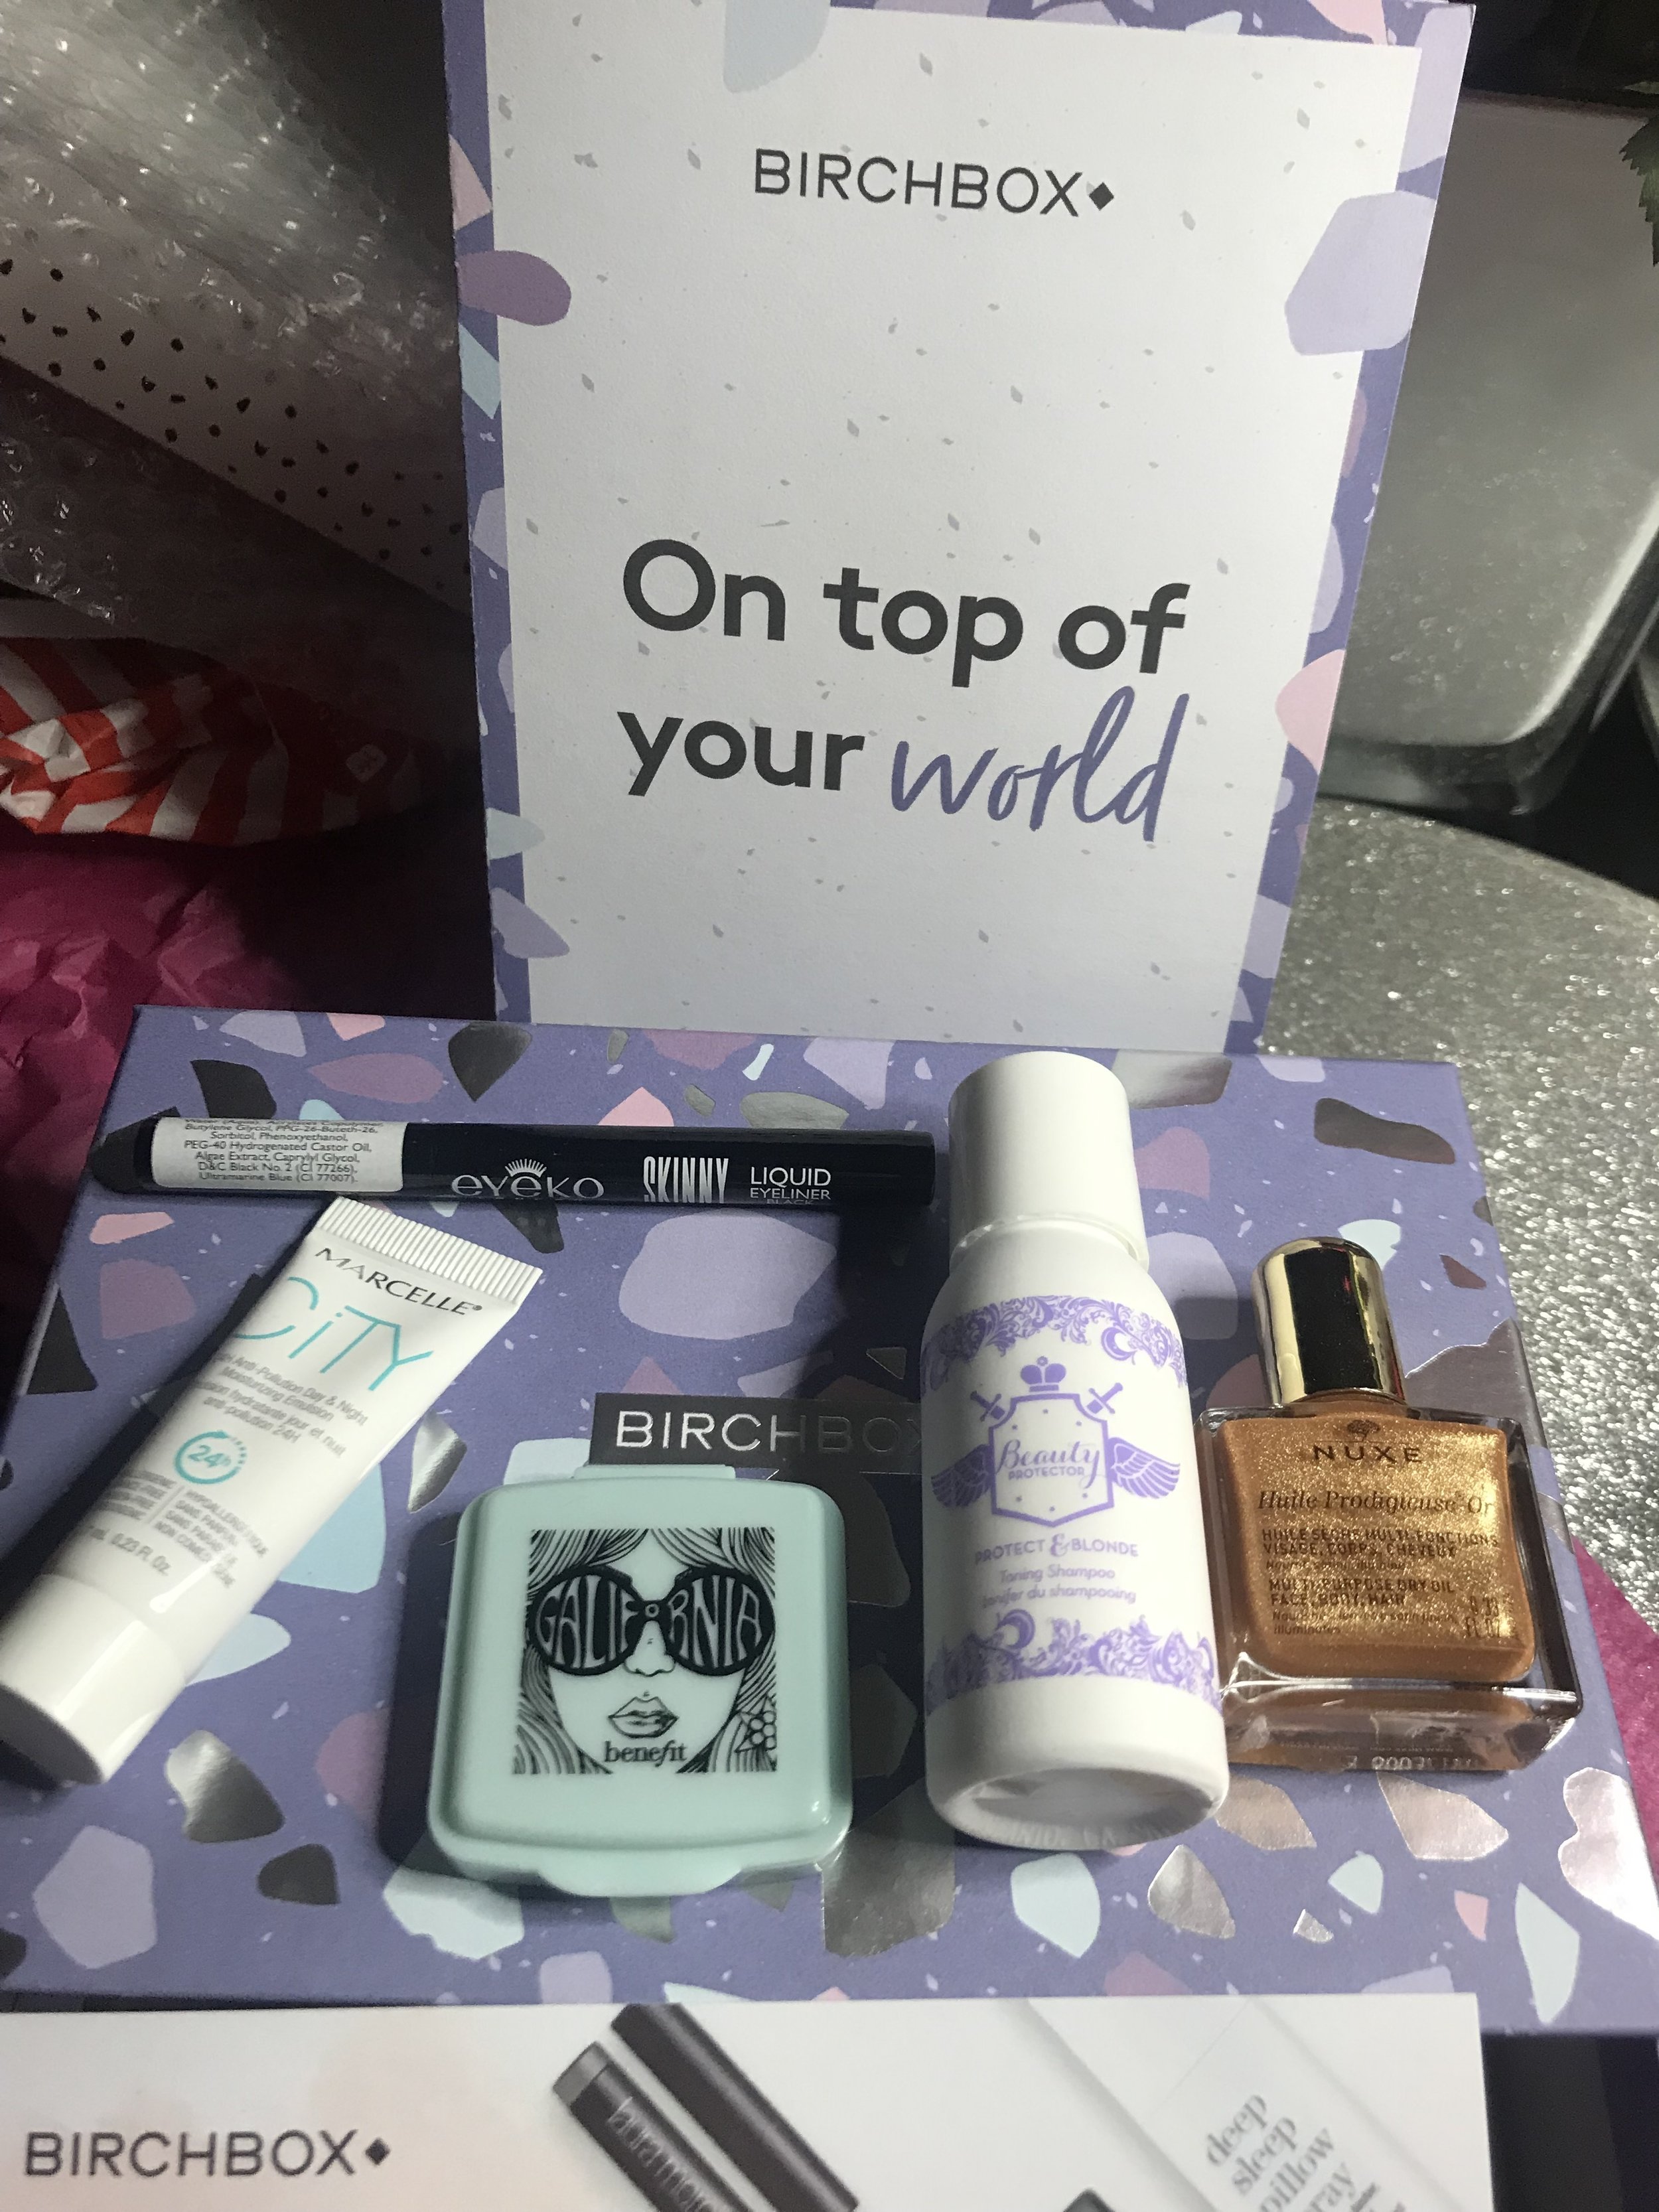 Here's a look at the box I won from Birchbox